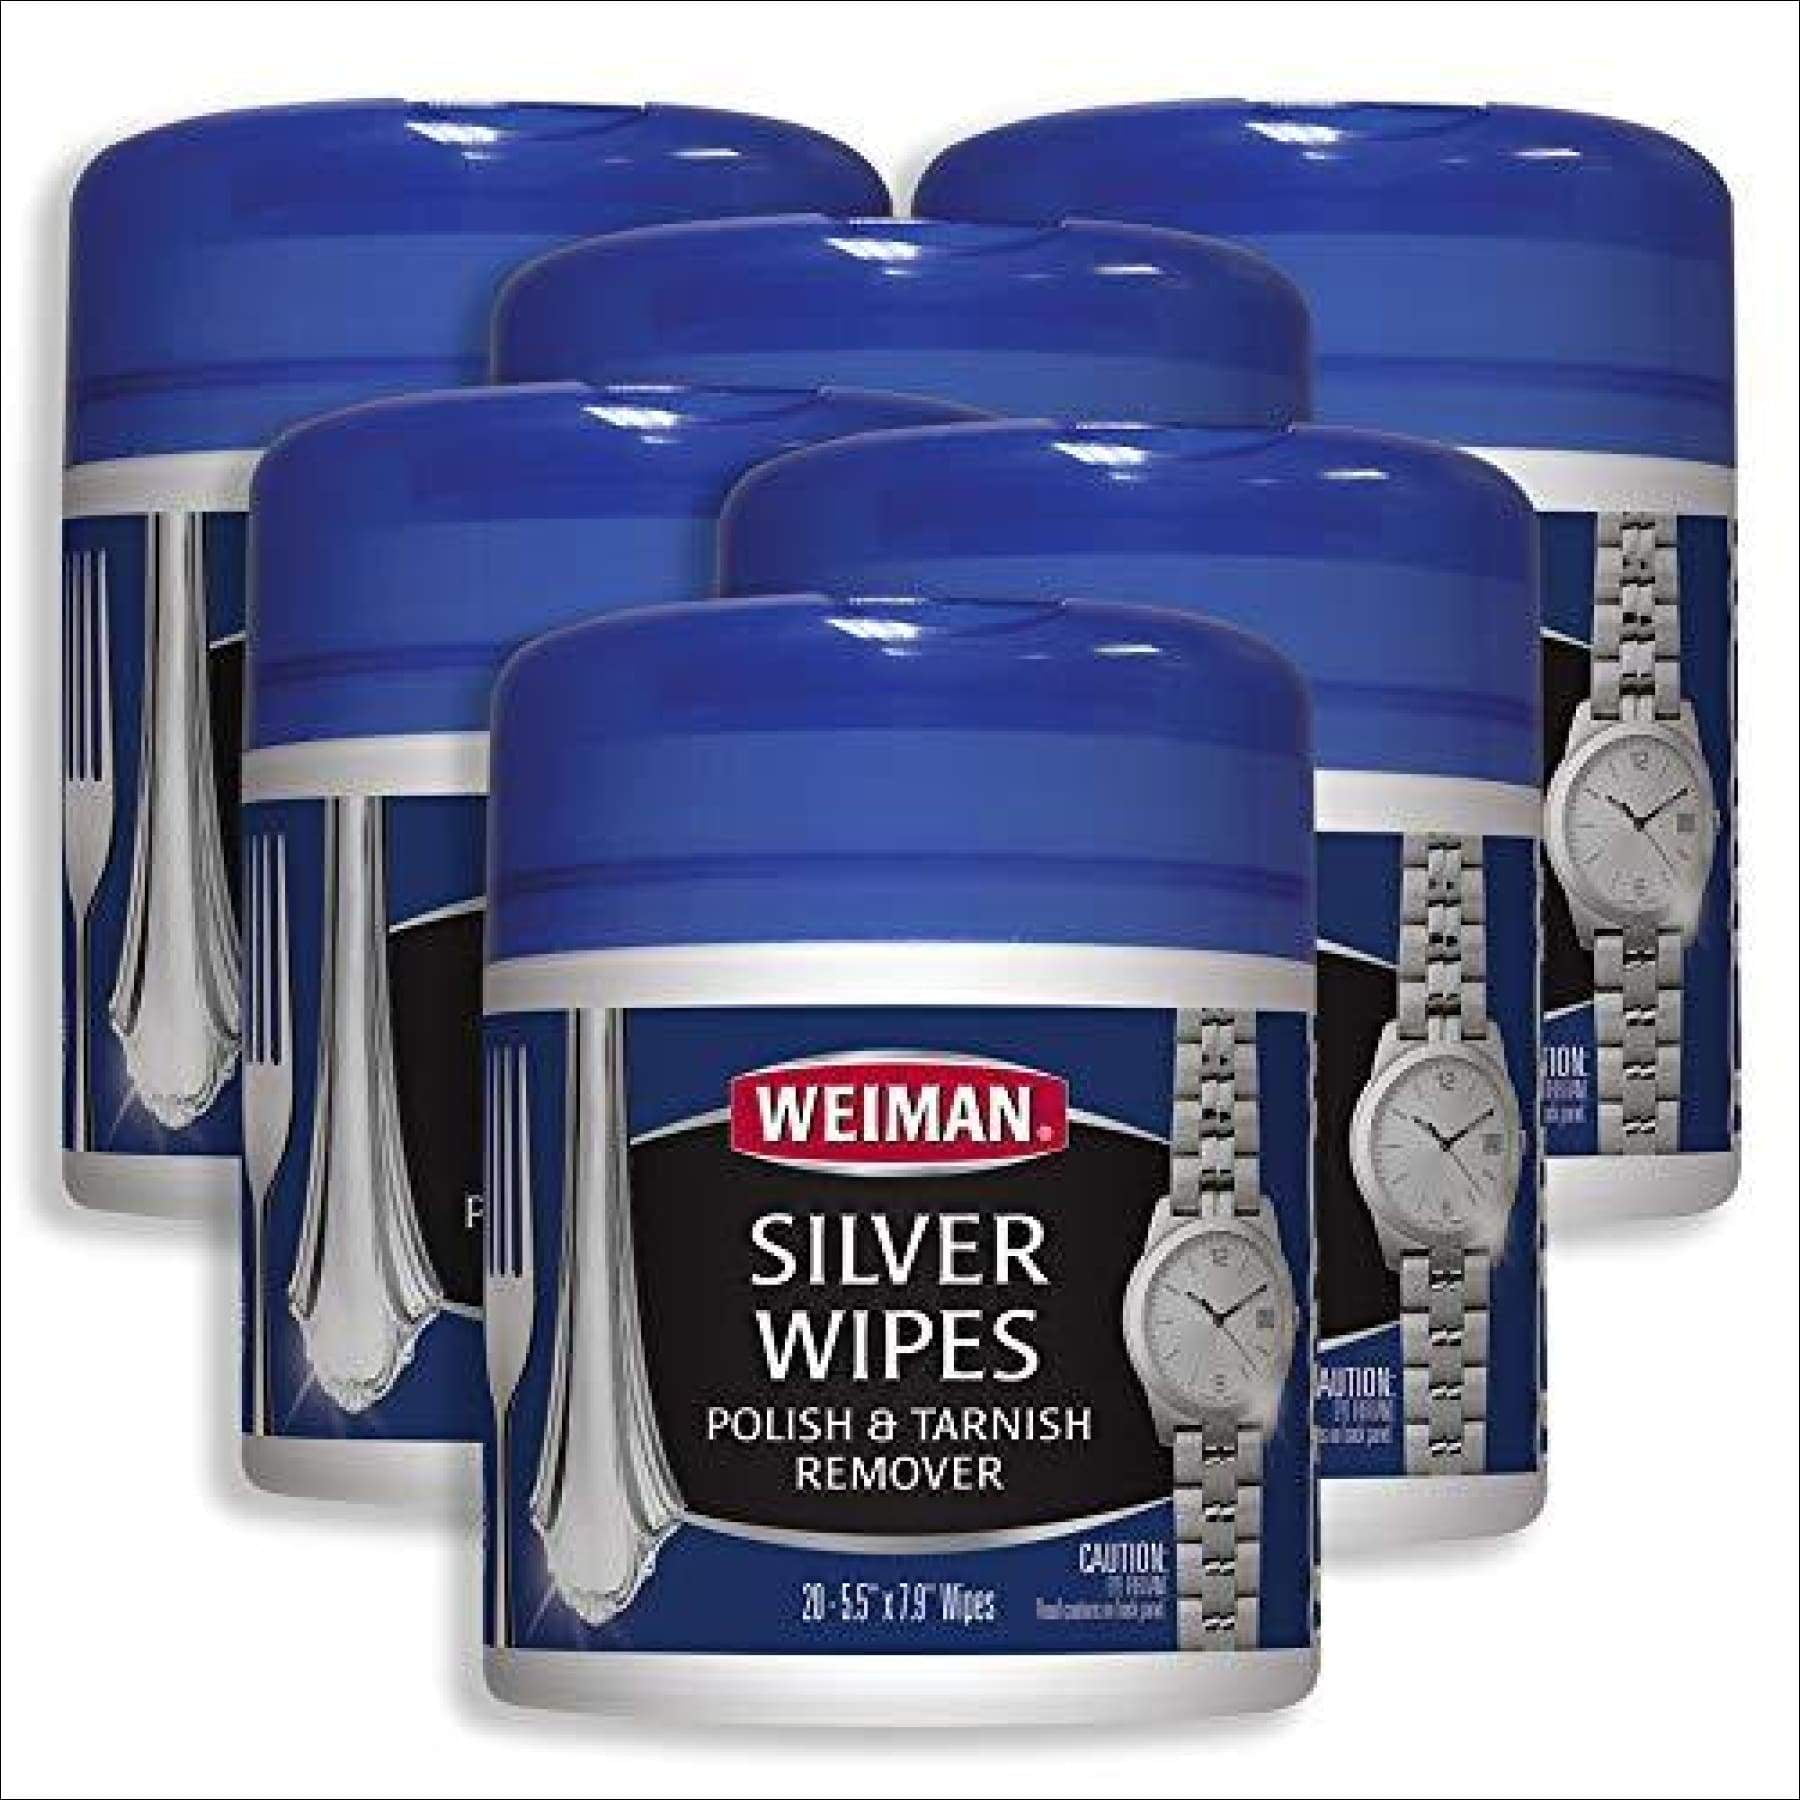 Bek Reviews the Weiman Silver Wipes 